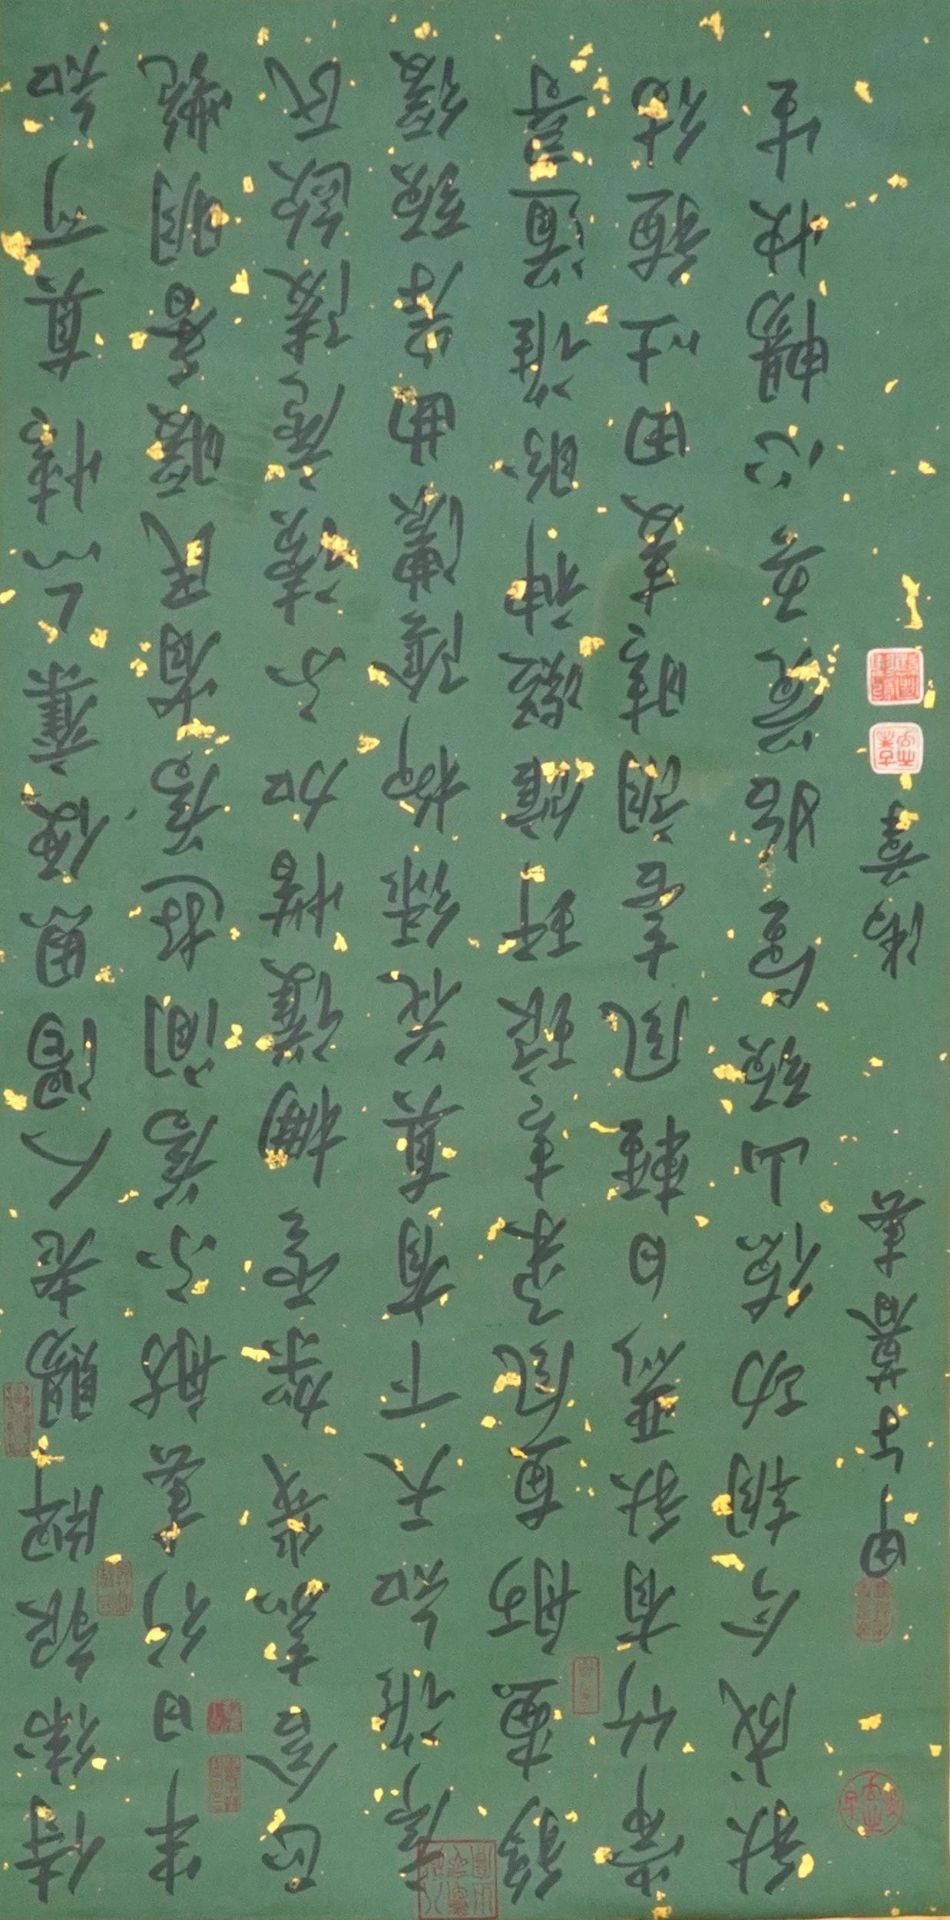 Cursive handwriting, Chinese ink on gilt covered wax paper, Chinese scroll, 133cm x 66cm